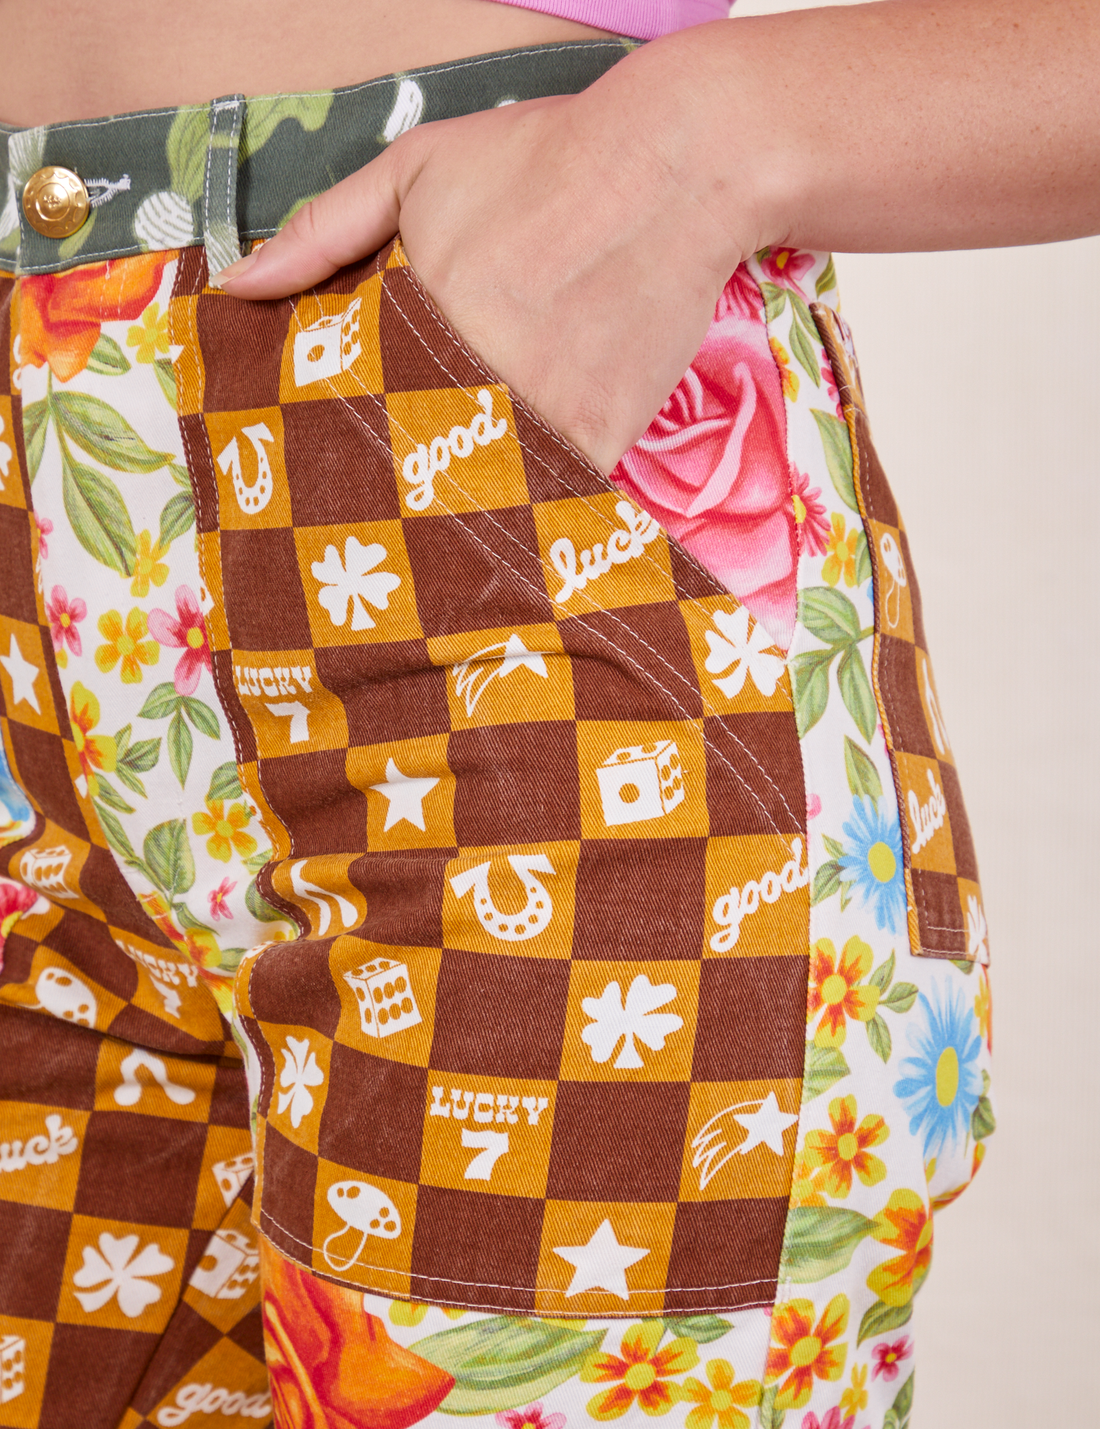 Mismatched Print Work Pants front pocket in our Lucky print close up. Alex has her hand in the pocket.